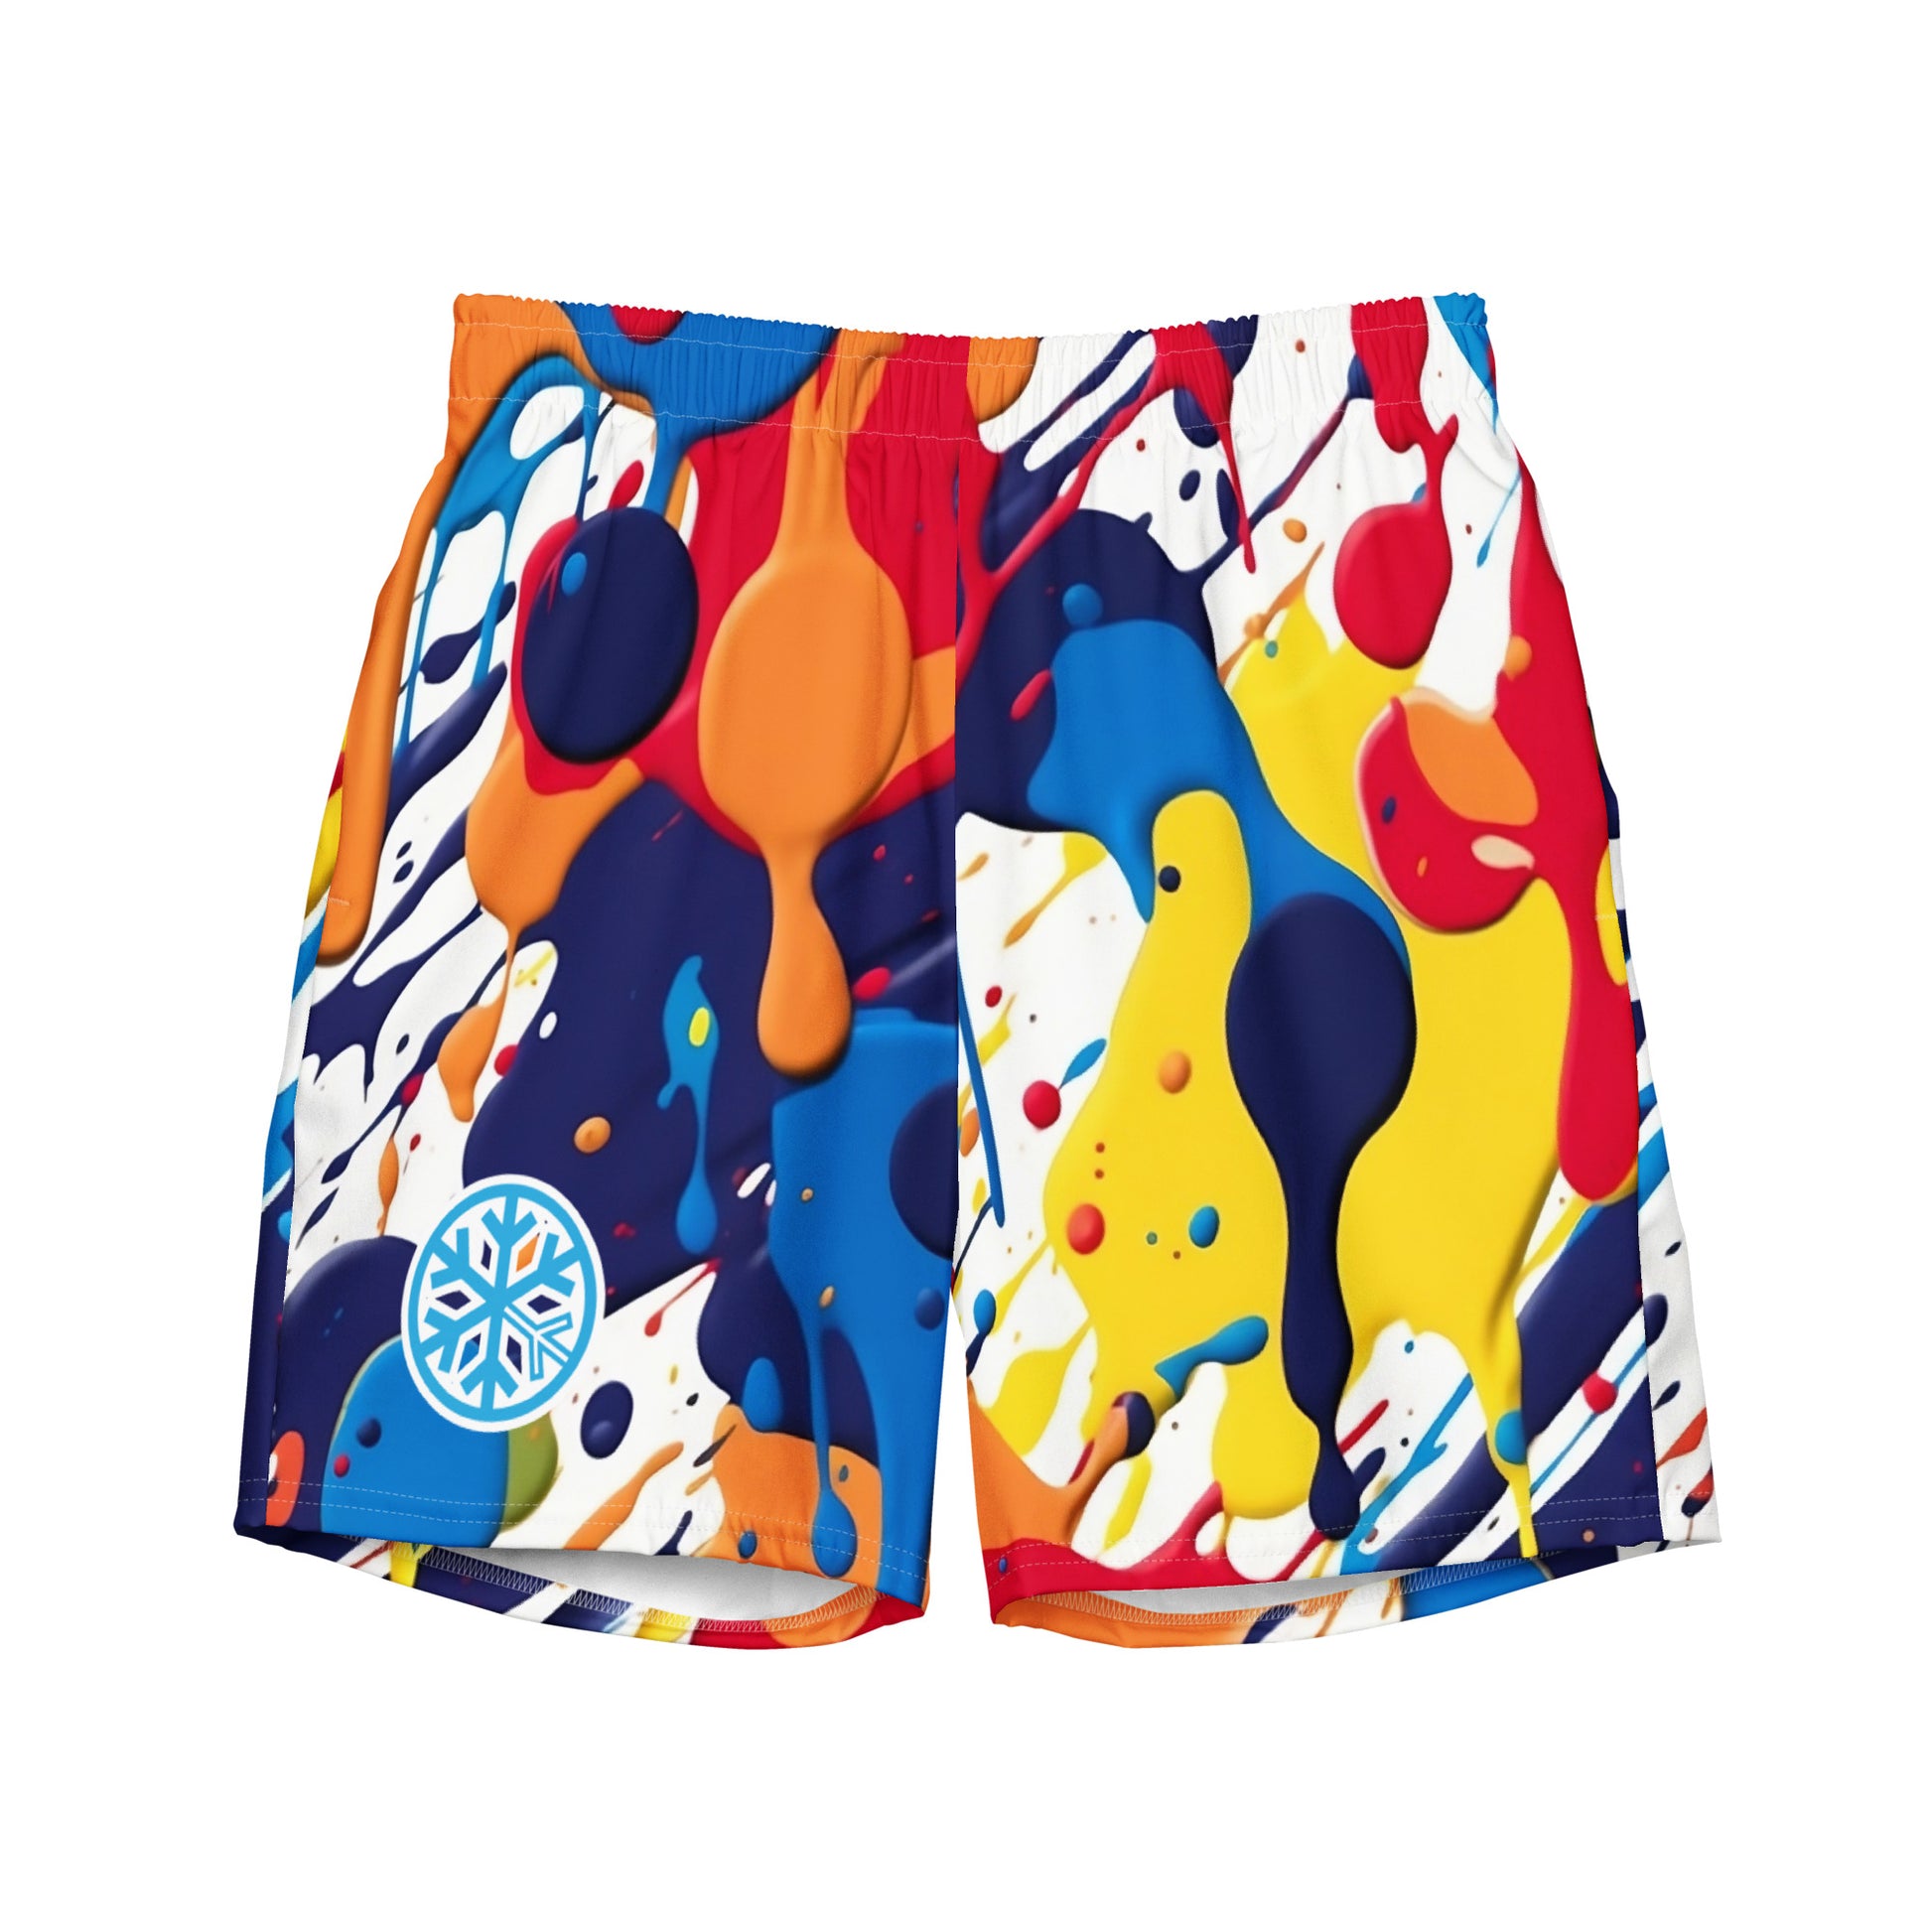 paint splashes swim shorts by B.Different Clothing independent streetwear inspired by street art graffiti